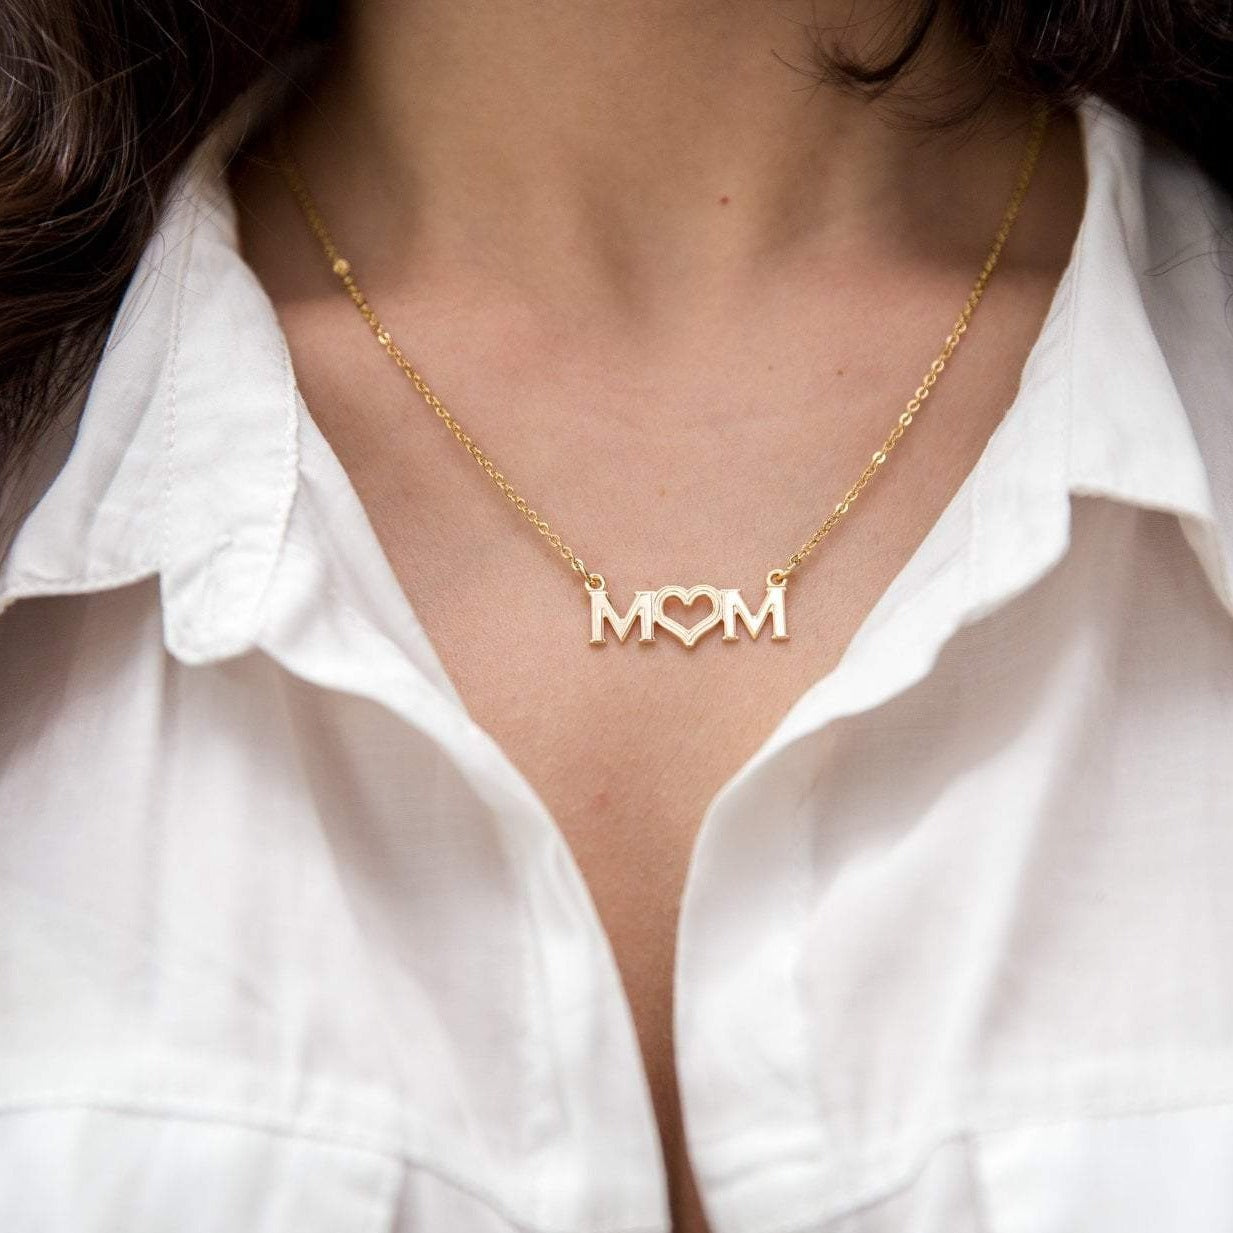 Bluenoemi Jewelry Necklaces Bluenoemi Mom Necklace for woman. Sterling Silver / Goldfilled